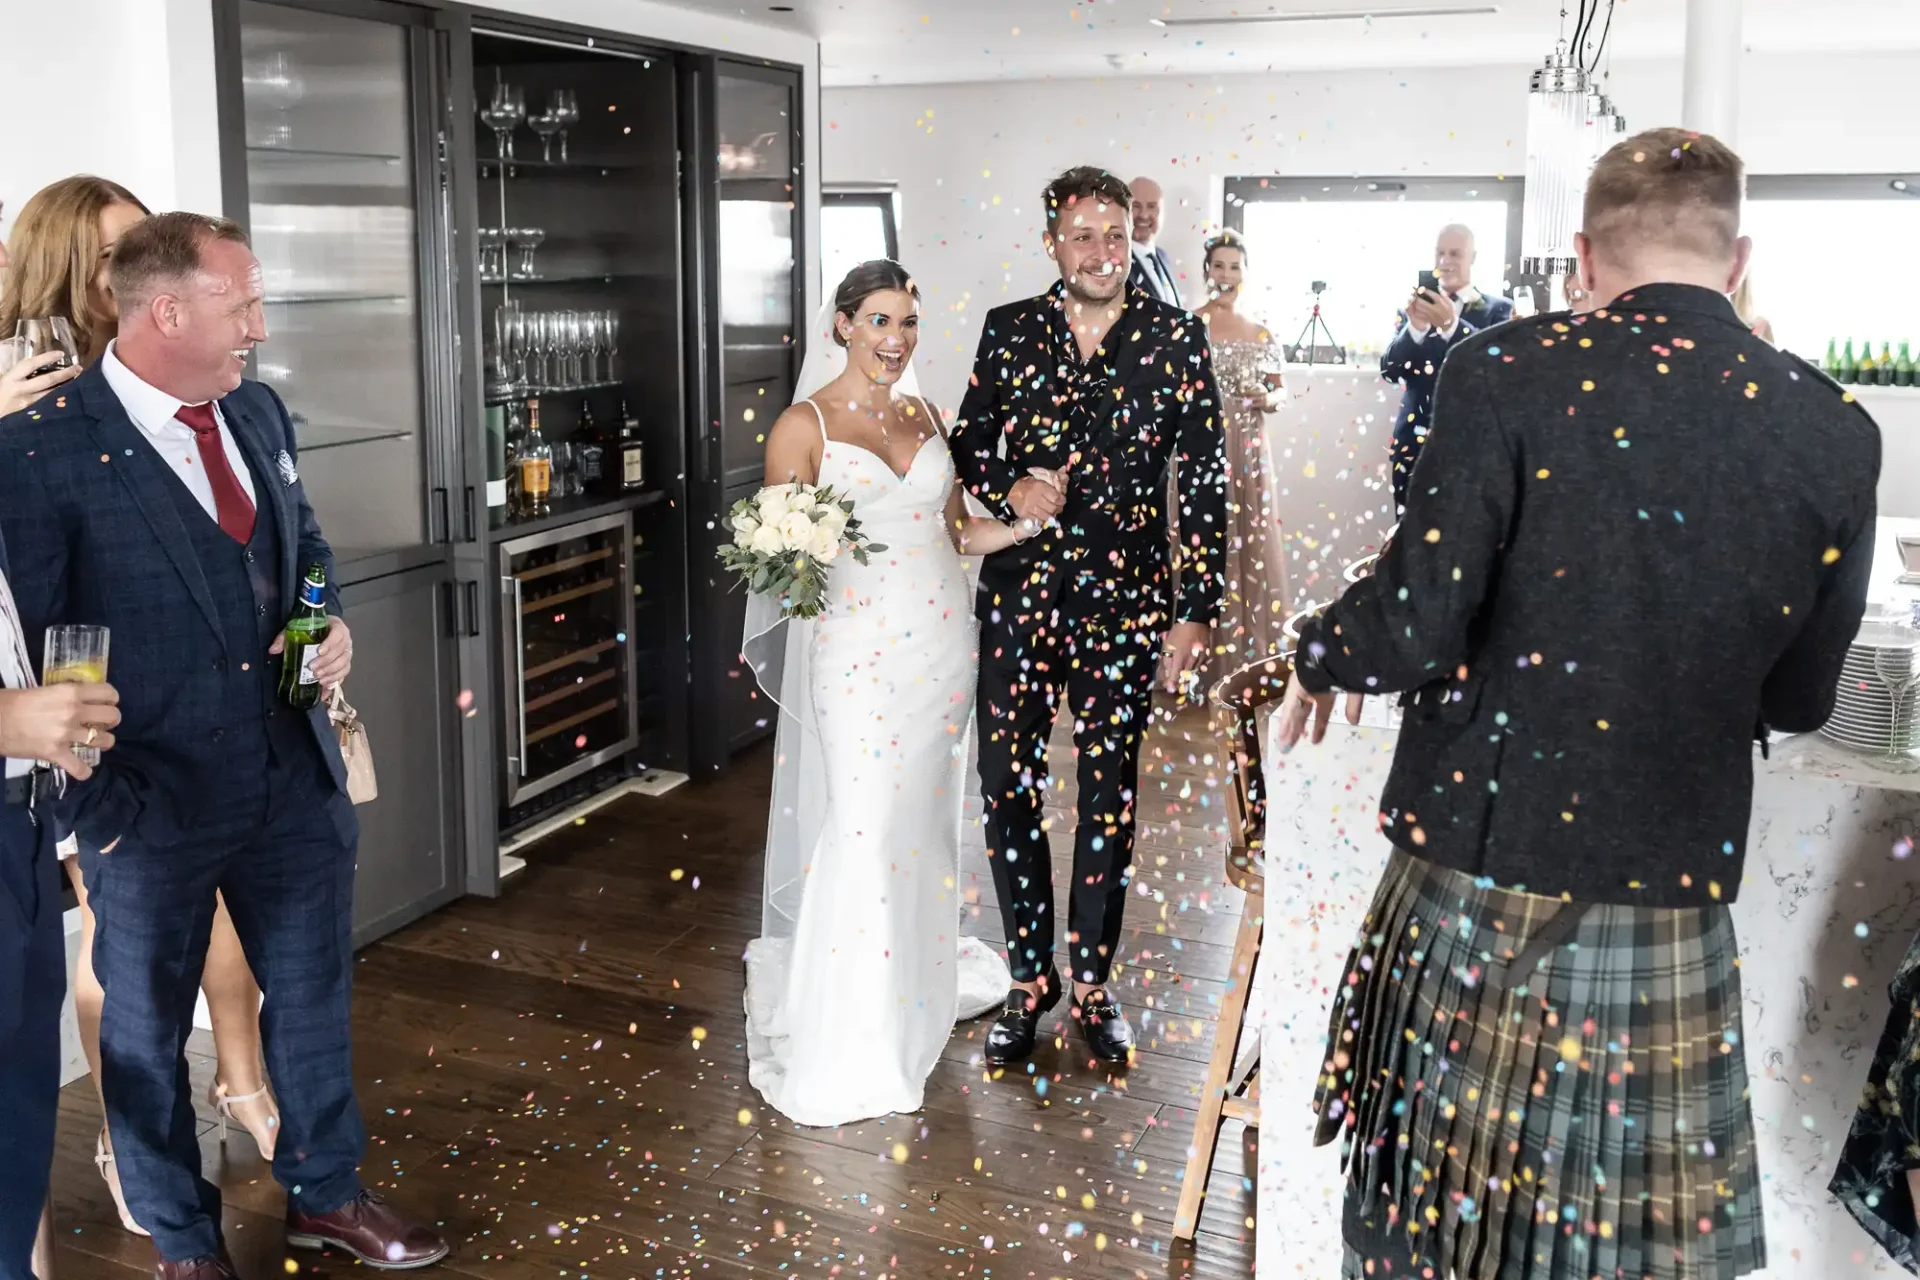 A newlywed couple walks through a scattered confetti shower, smiling, with guests observing in a brightly lit room.